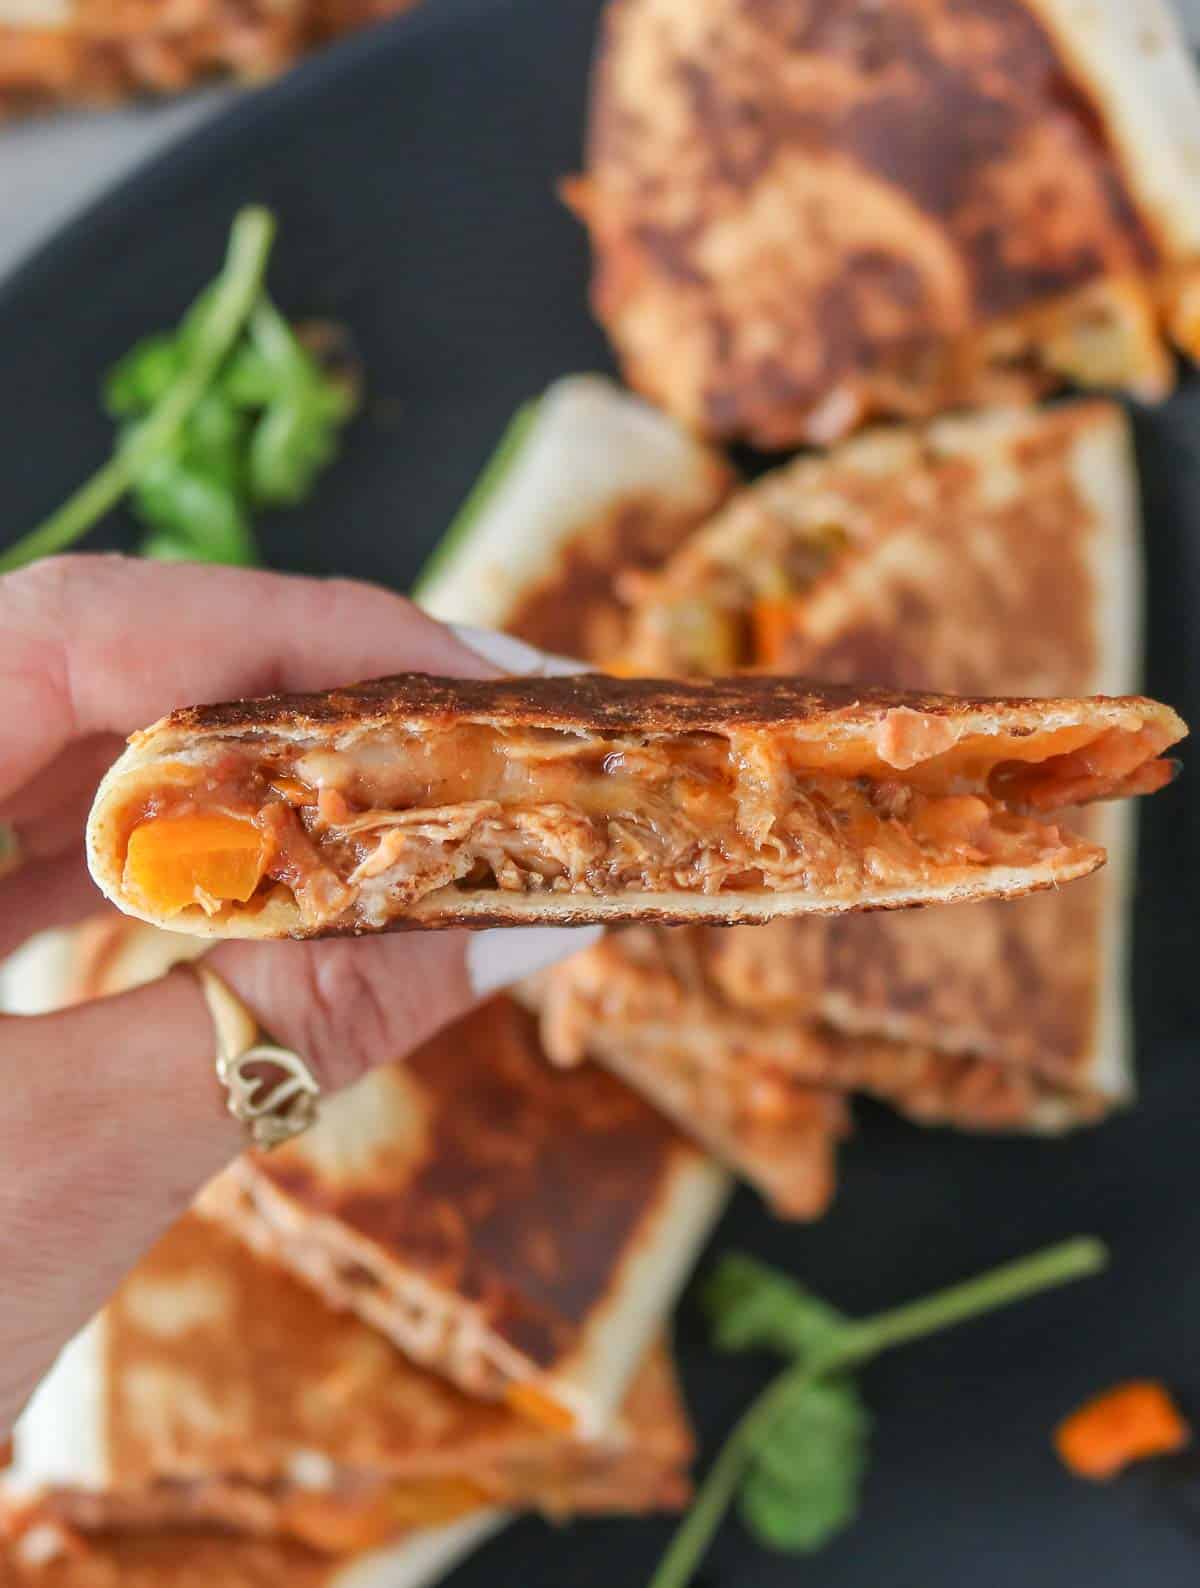 Hand holding a pulled pork quesadilla.